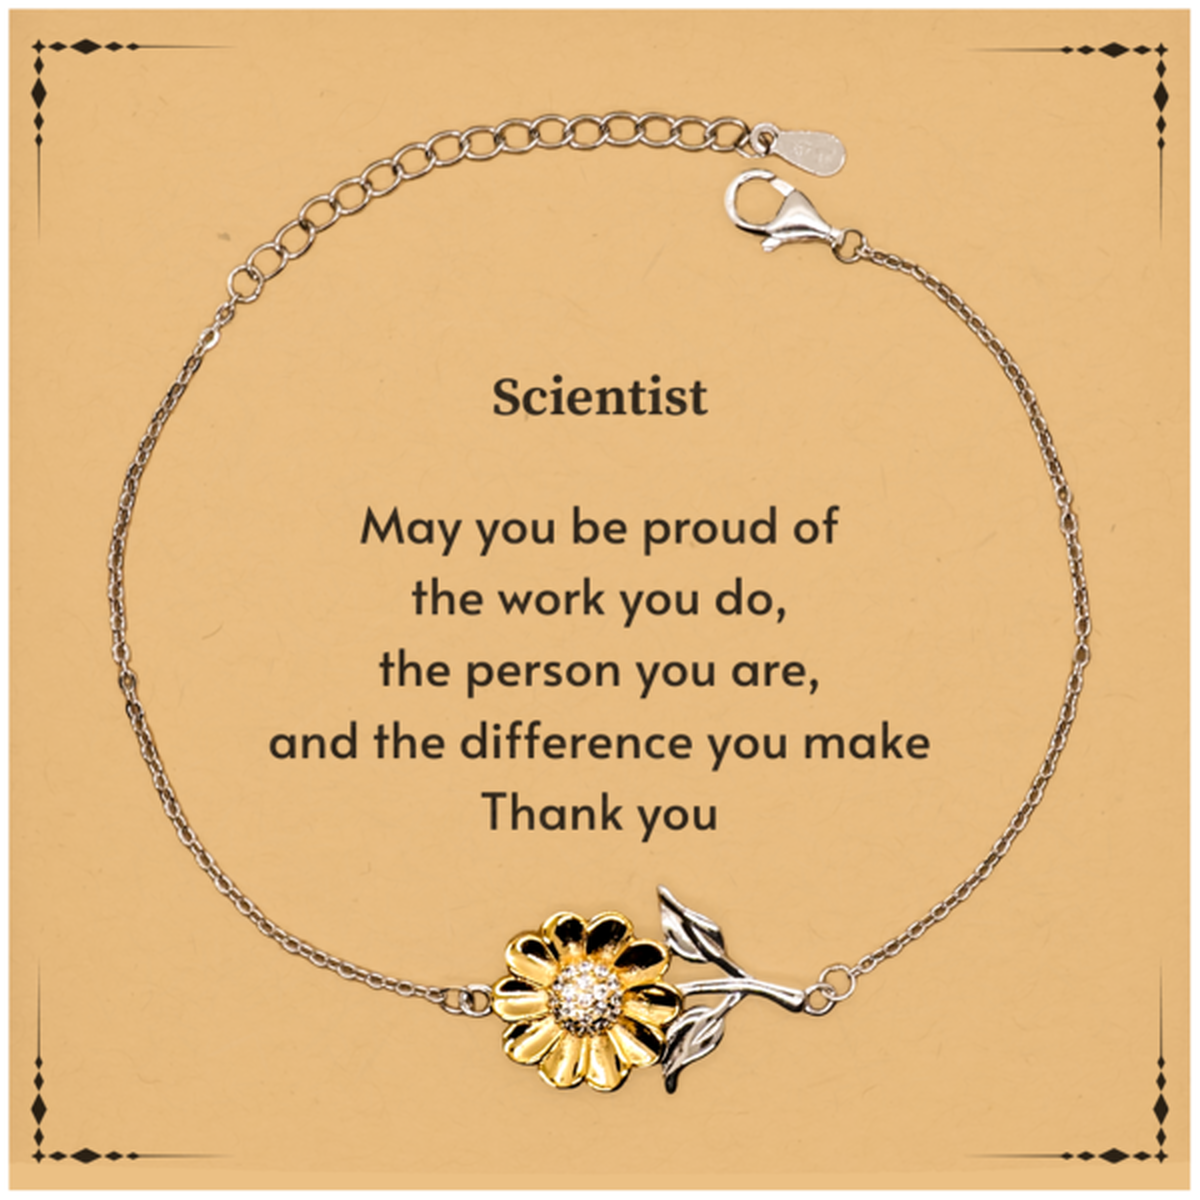 Heartwarming Sunflower Bracelet Retirement Coworkers Gifts for Scientist, Scientist May You be proud of the work you do, the person you are Gifts for Boss Men Women Friends